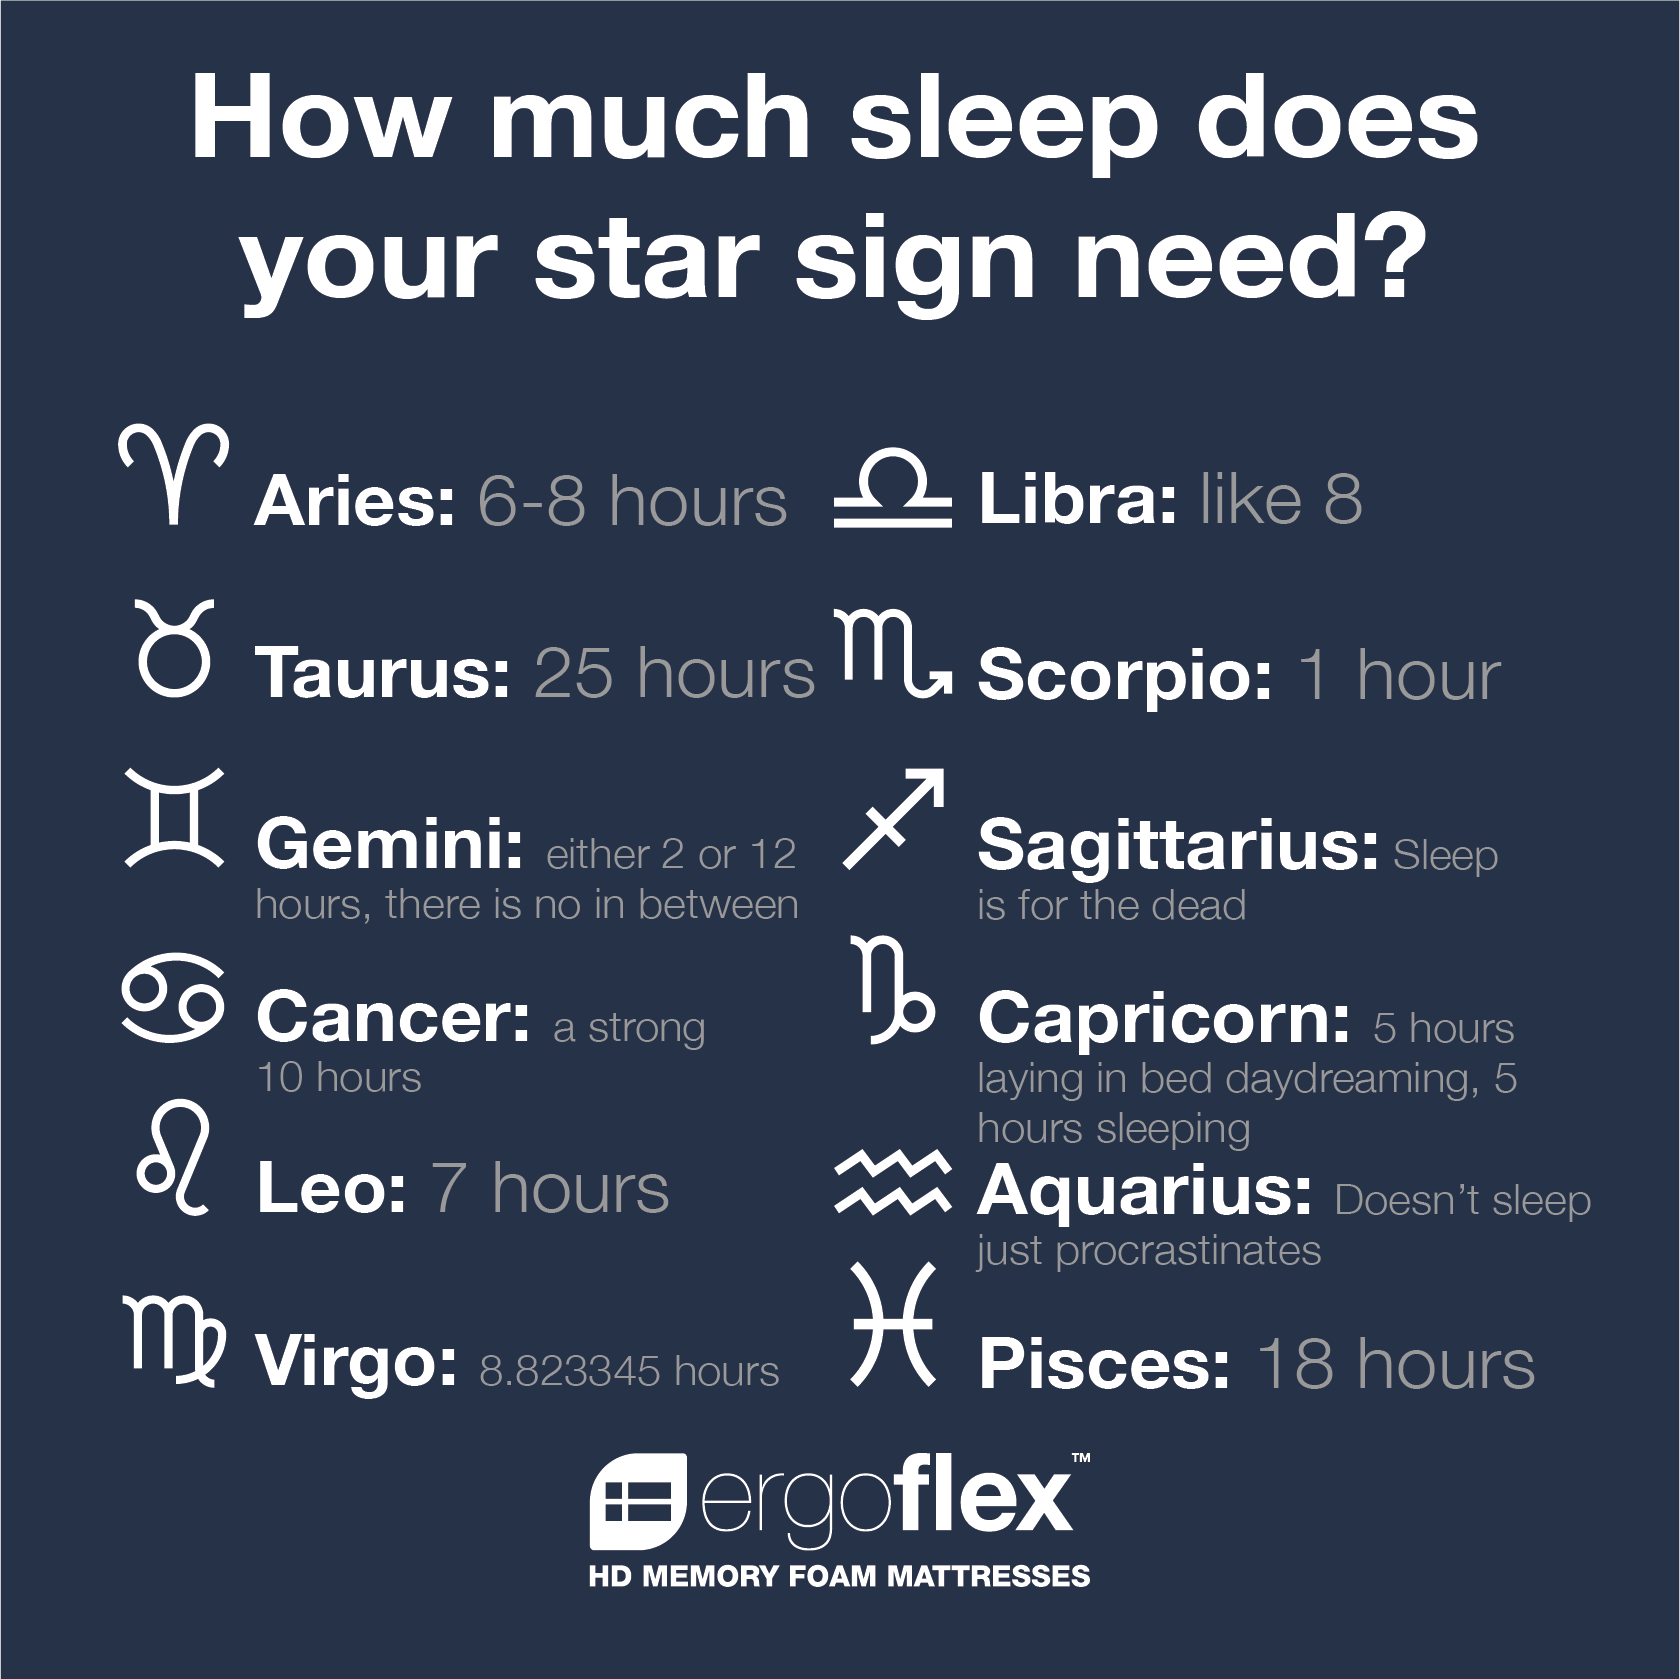 Why are scorpio so good in bed